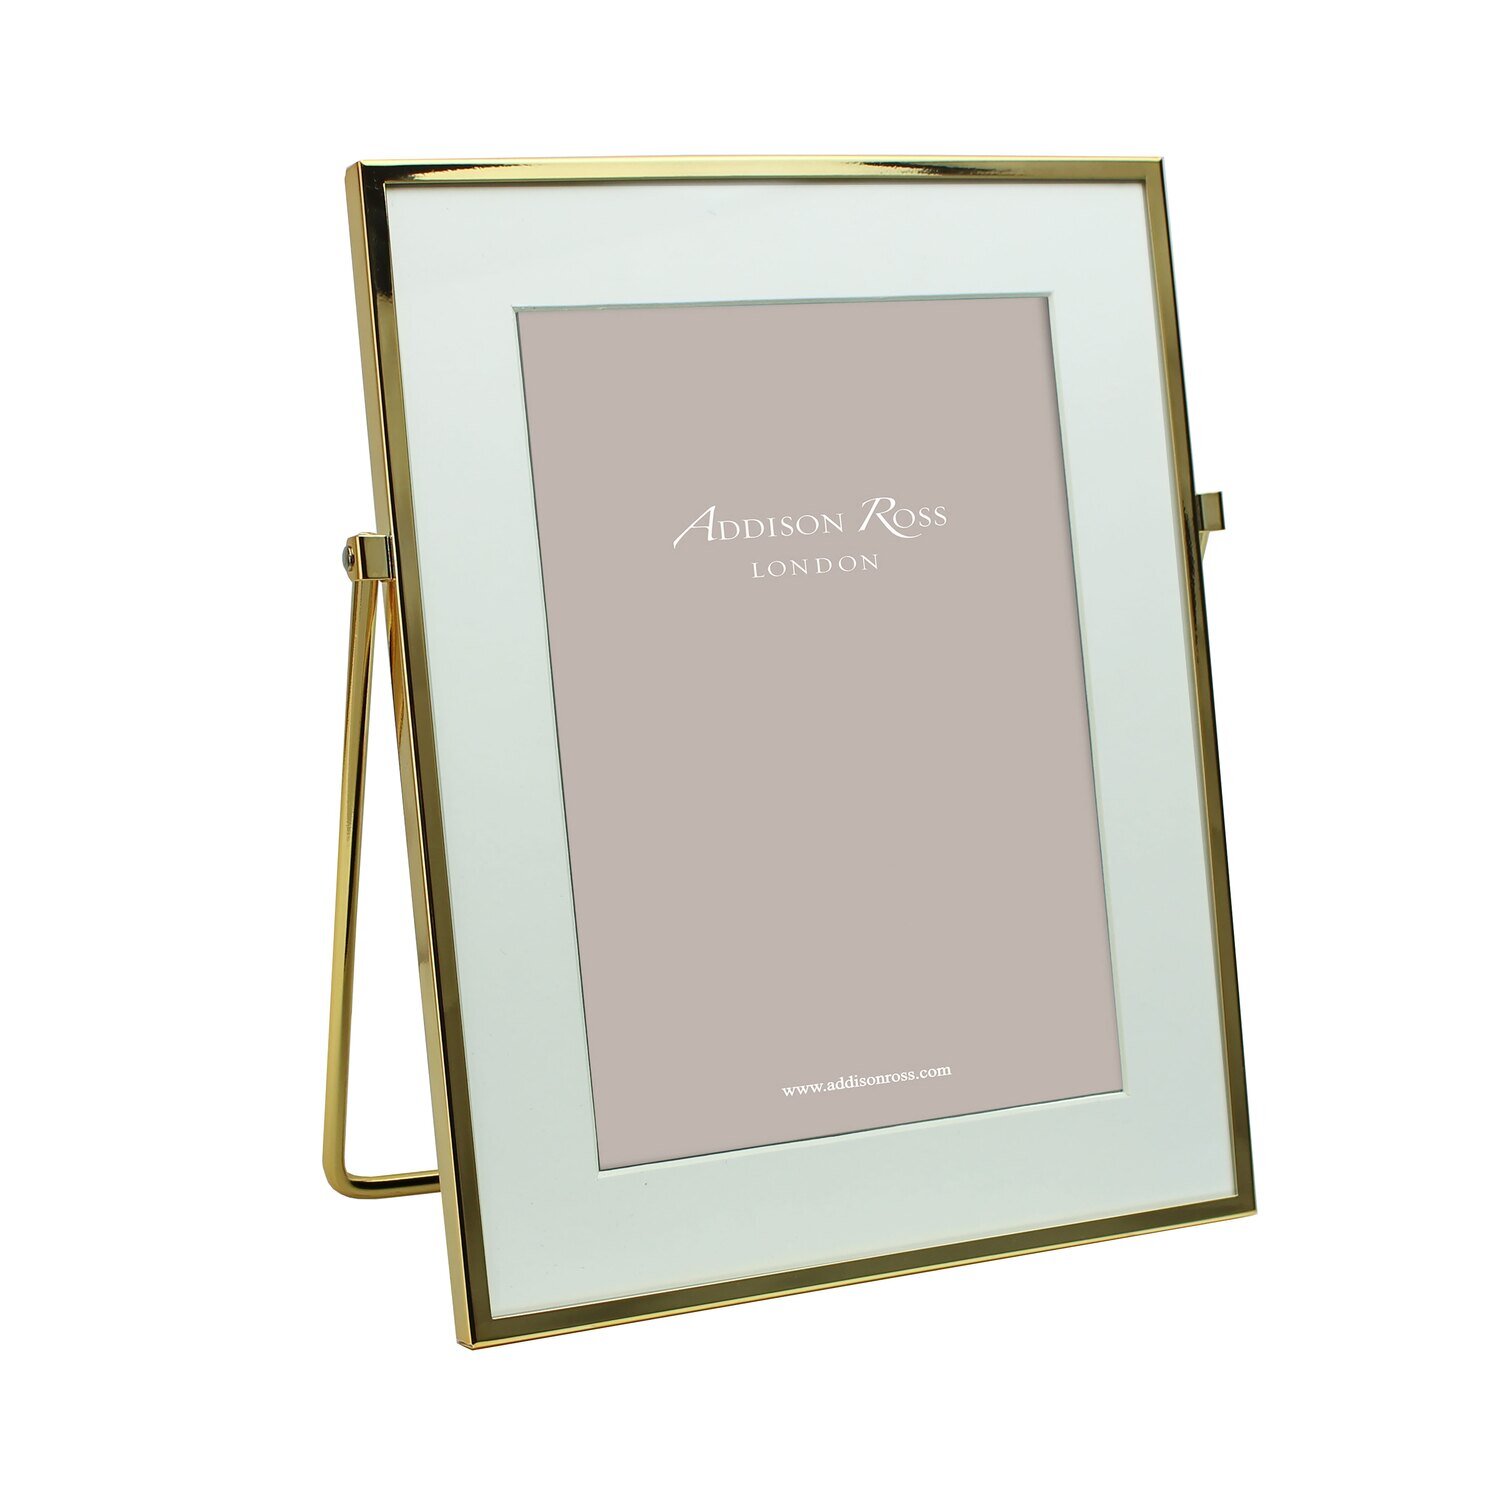 Addison Ross 4 x 6 Inch Gold with Easel Leg Picture Frame Gold FR3572